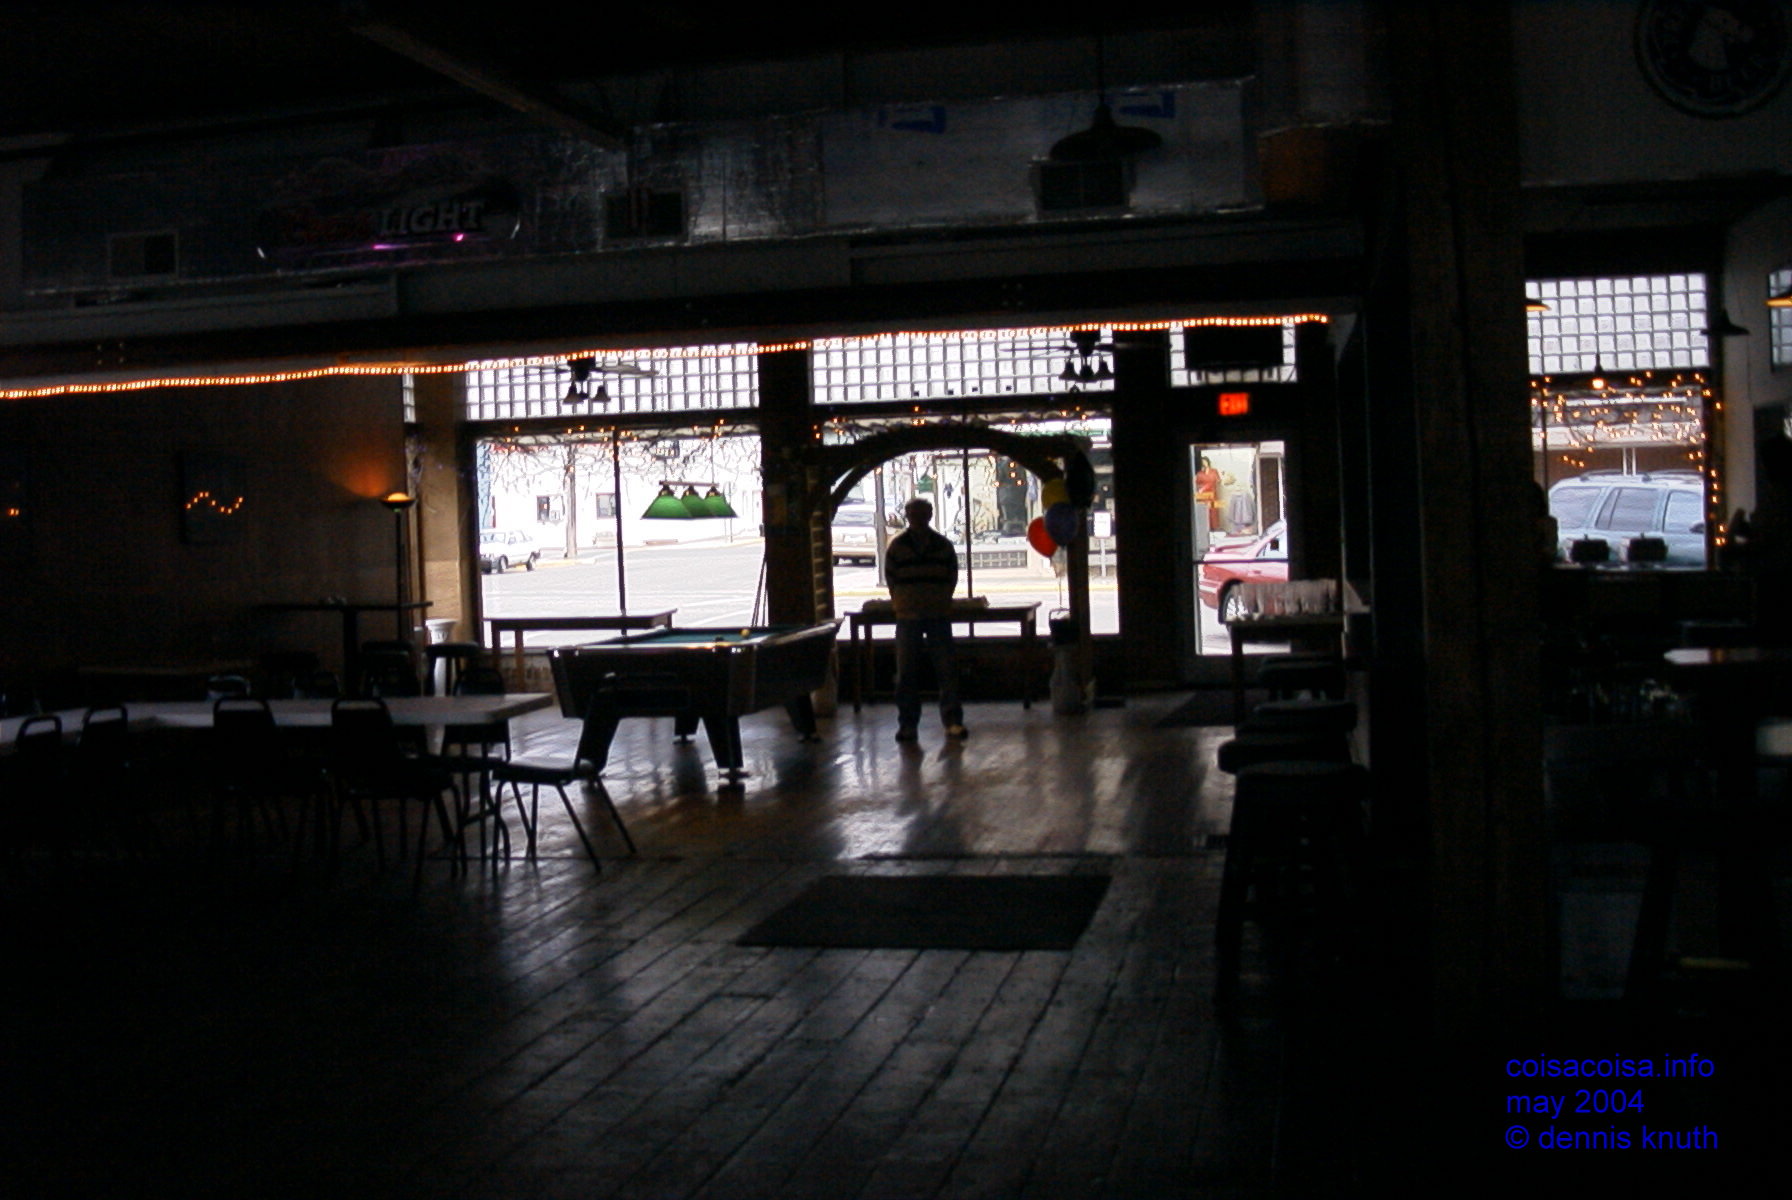 The bar and restaurant where the Rehearsal Dinner was held